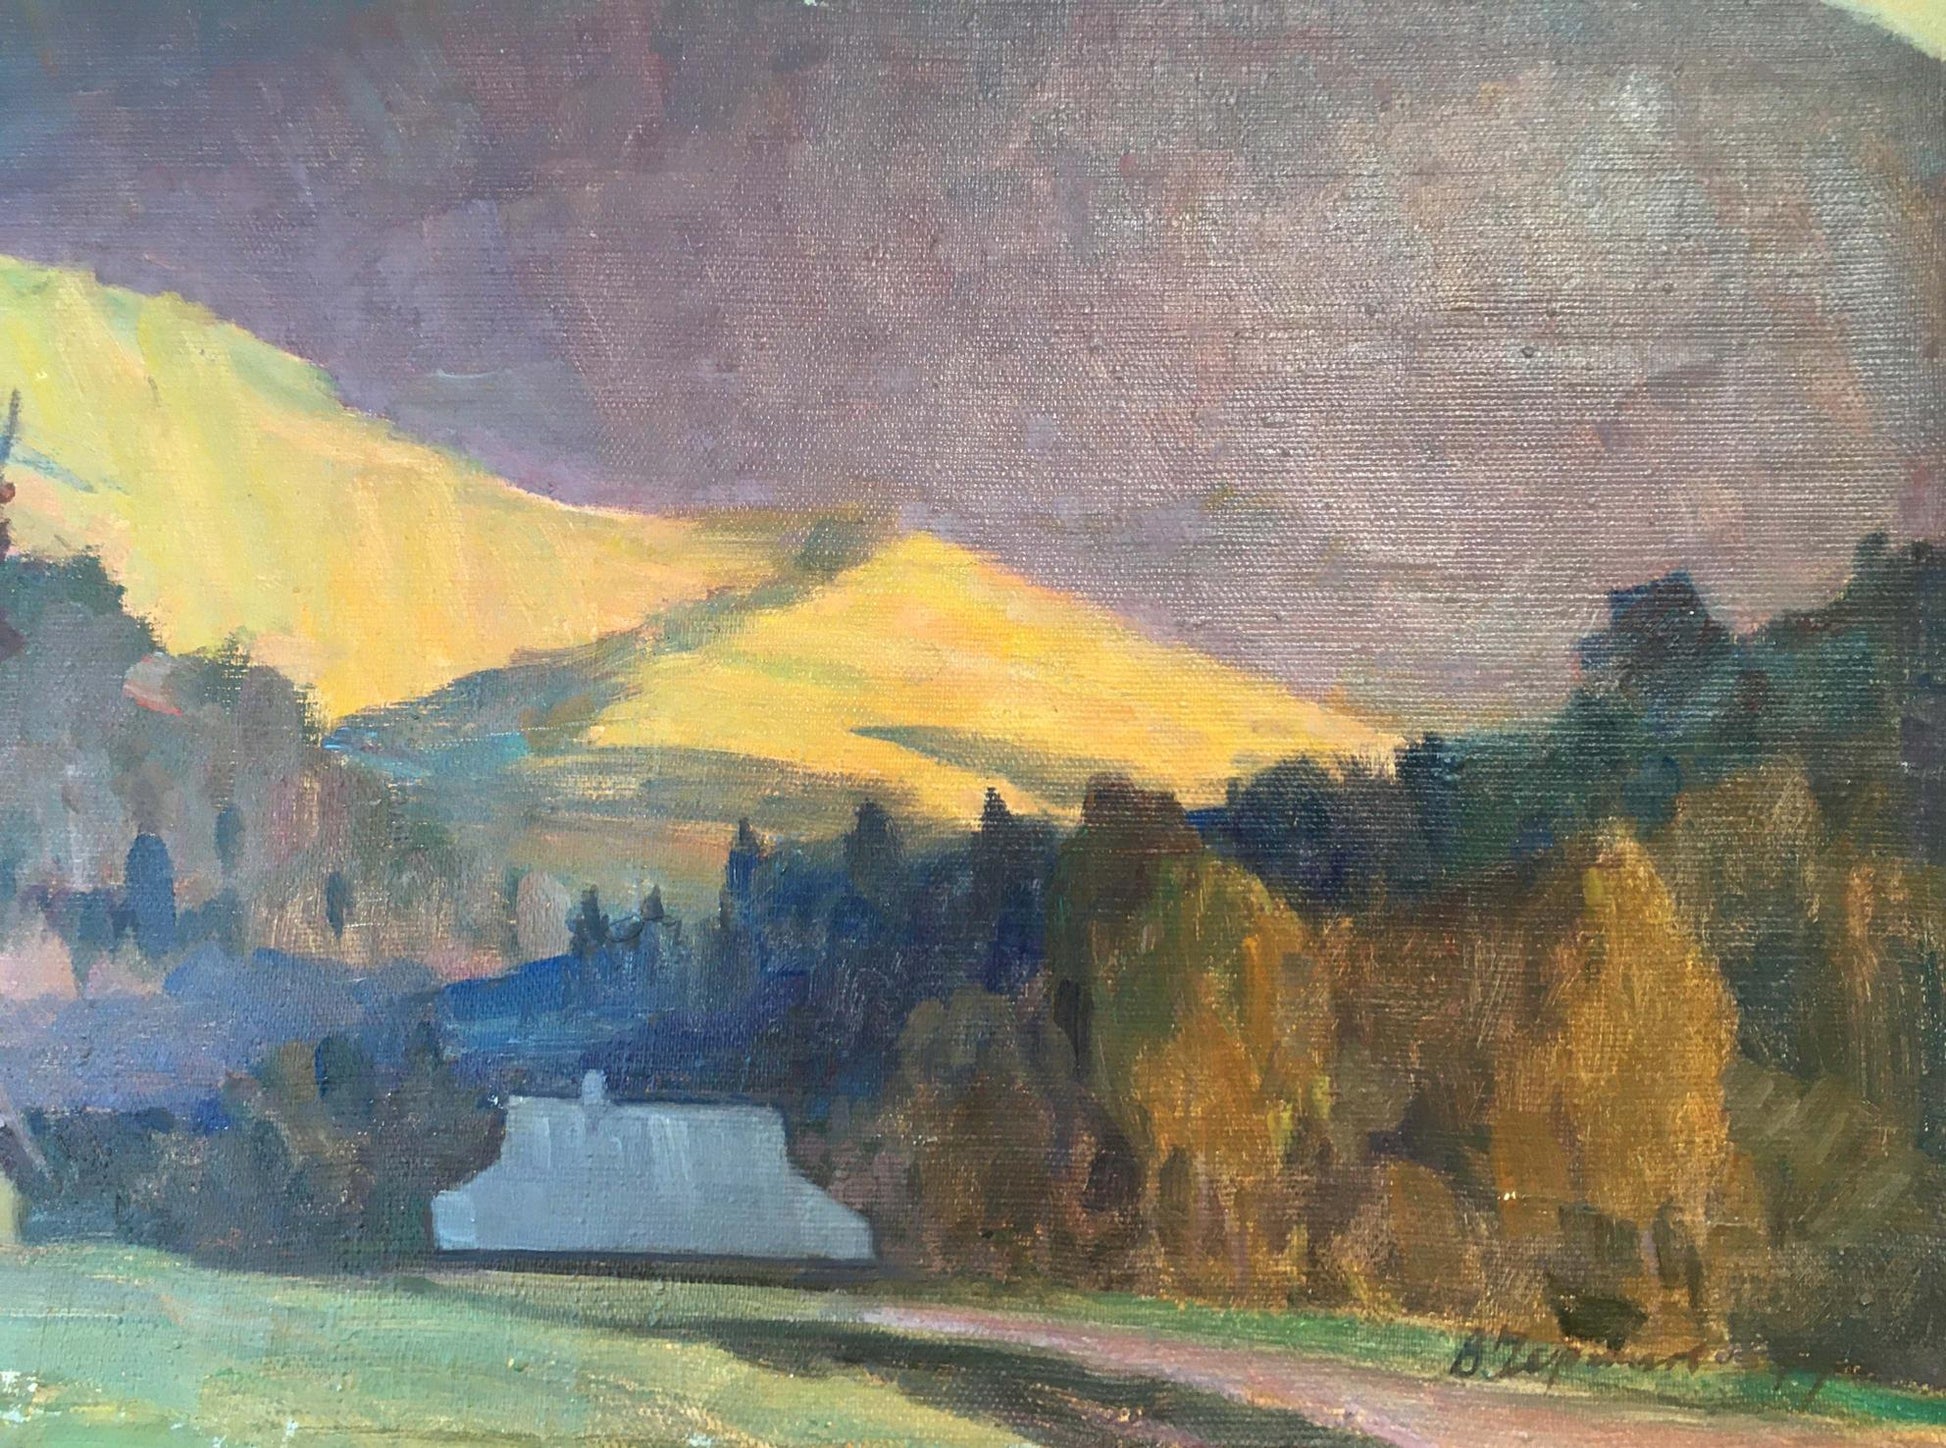 In Chernikov Vladimir Mikhailovich's painting, mountains are depicted in oil